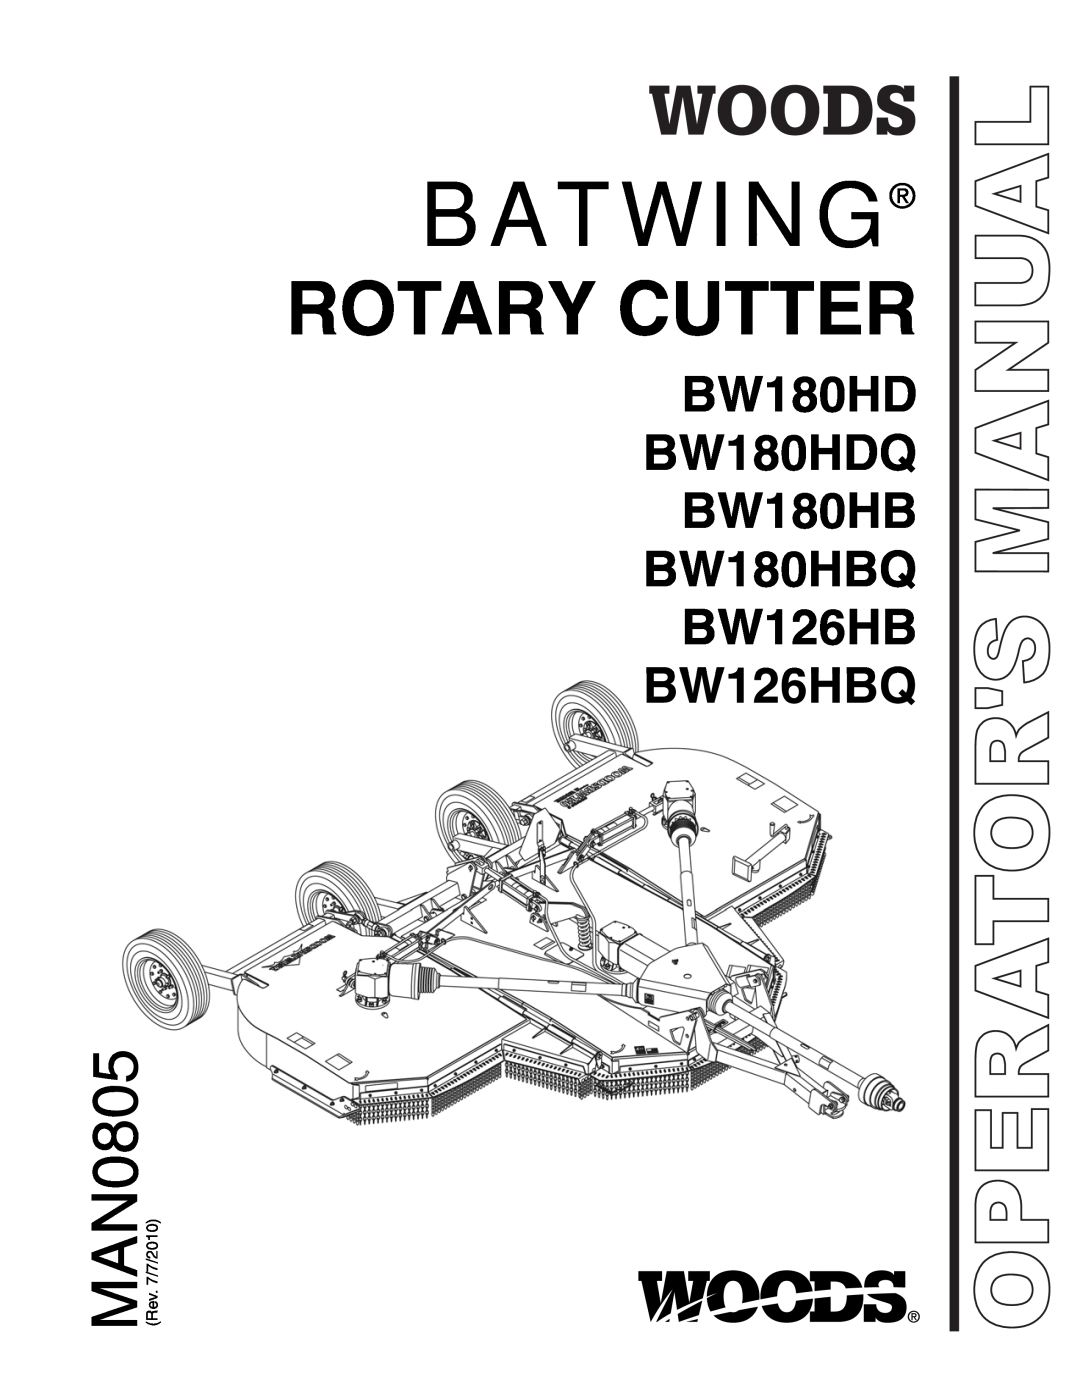 Woods Equipment manual Batwing, Rotary Cutter, BW180HD BW180HDQ BW180HB BW180HBQ BW126HB BW126HBQ, Operators Manual 